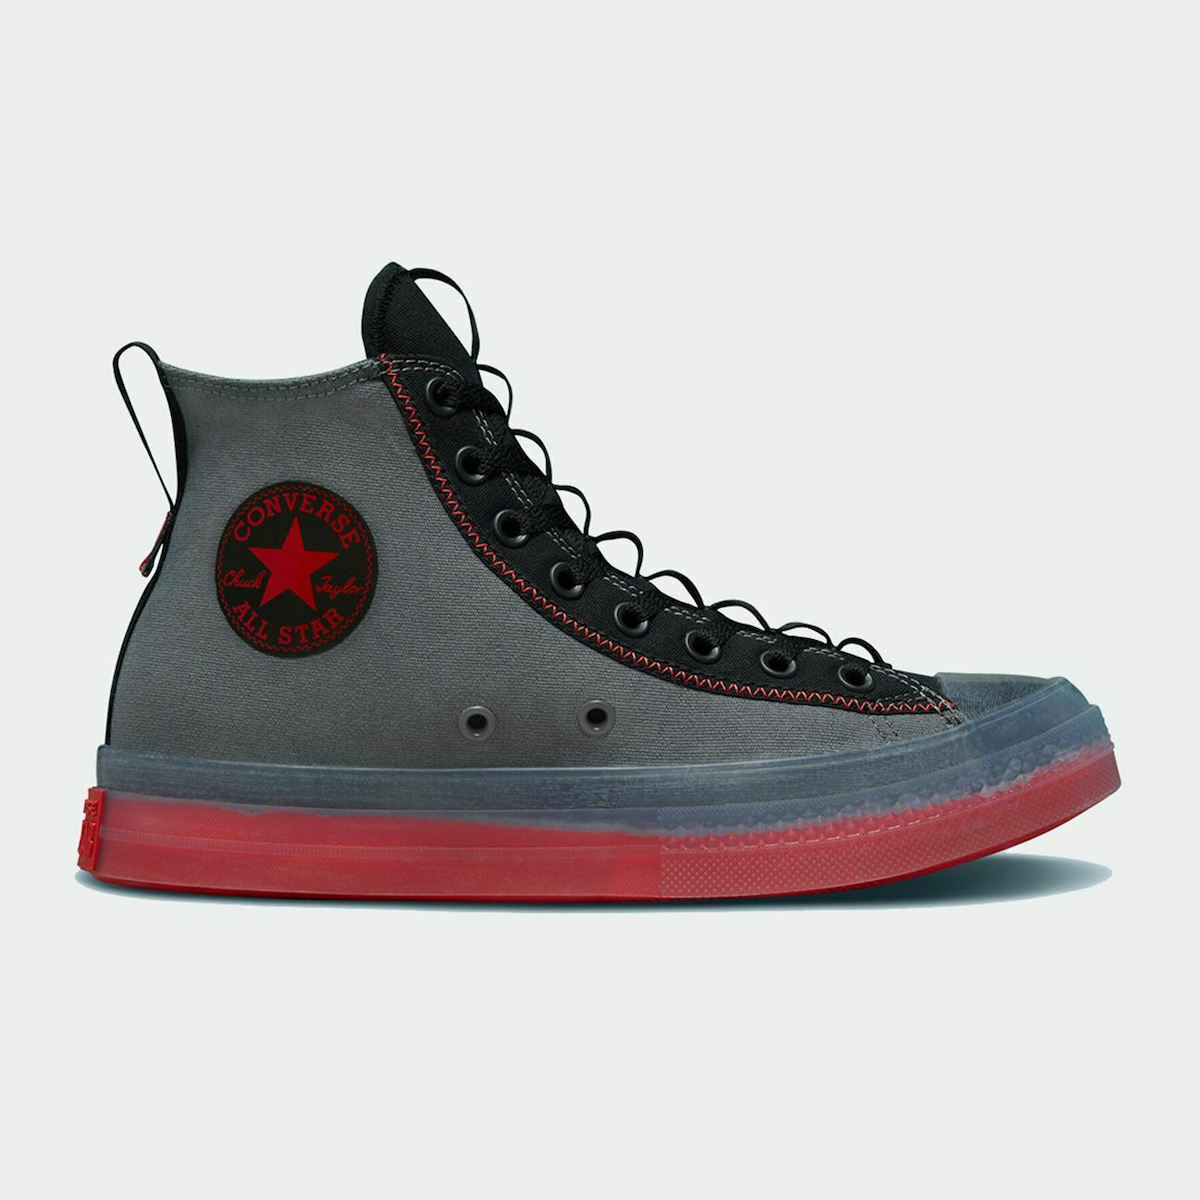 fret disgusting camp Converse Chuck Taylor All Star CX Ανδρικά Μποτάκια Γκρι A00820C | Skroutz.gr